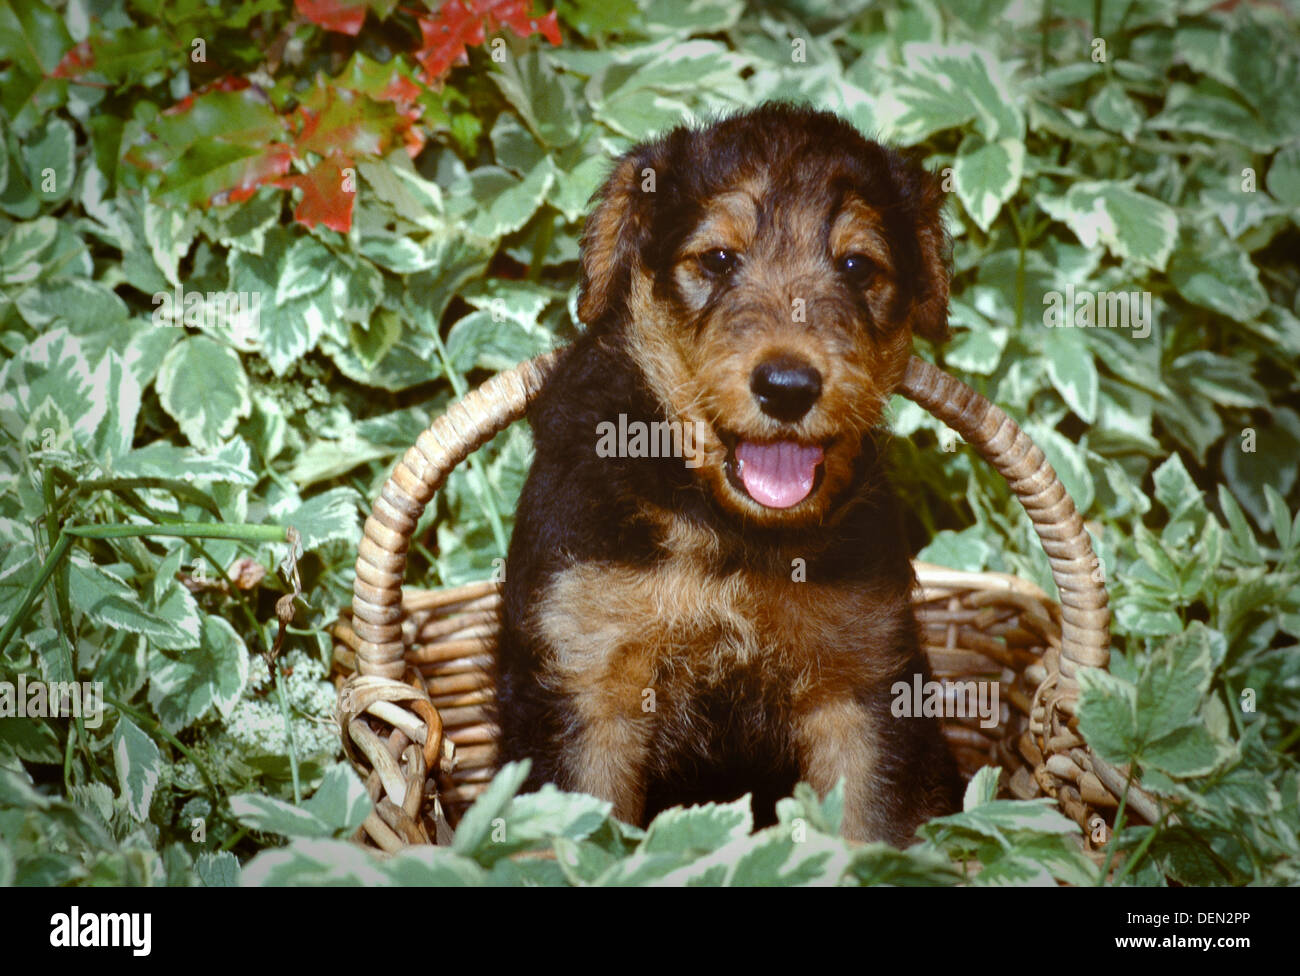 Airedale terrier puppy in basket Stock Photo